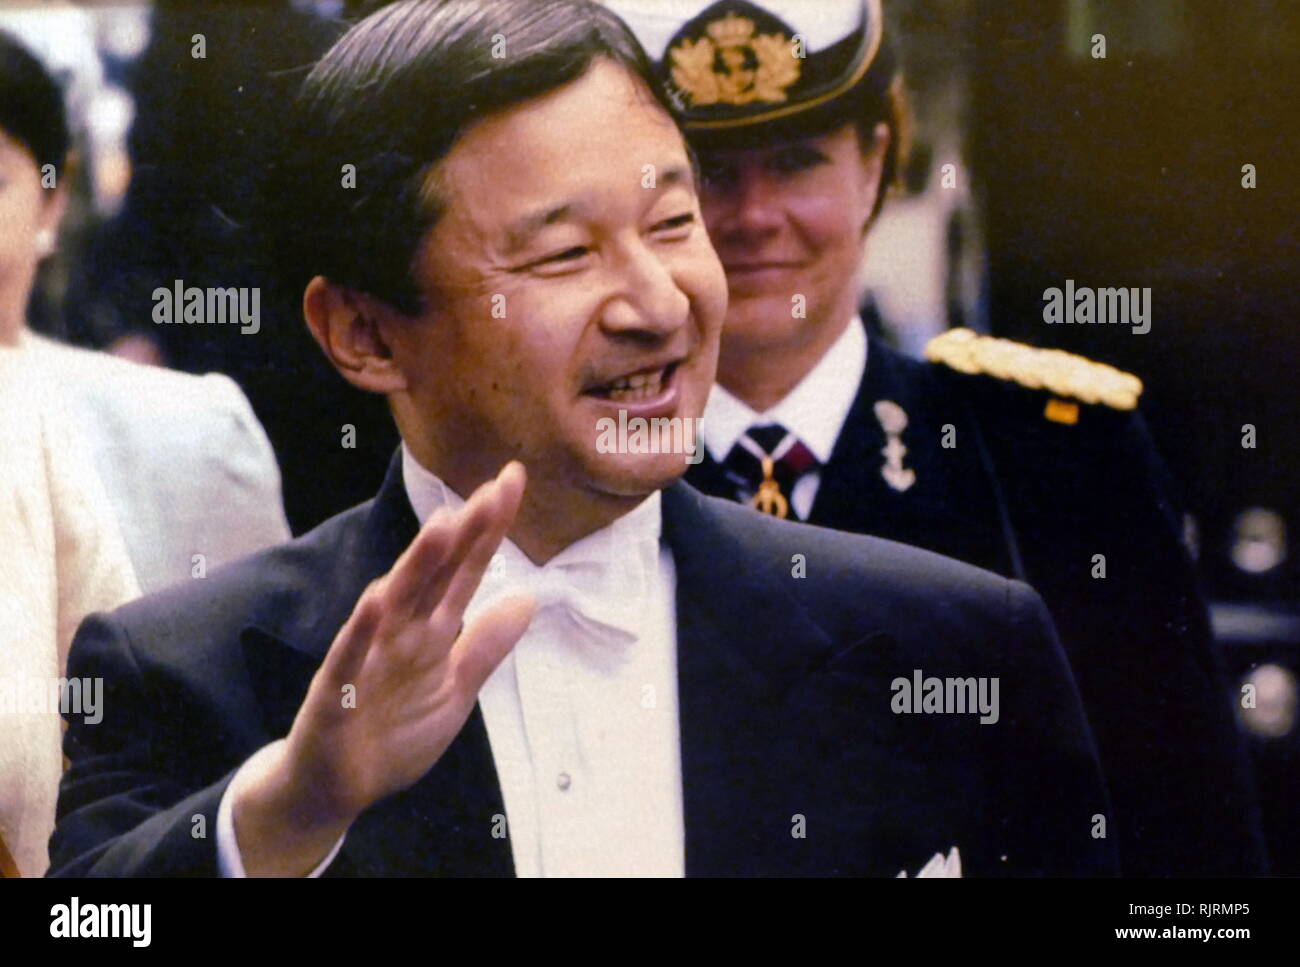 Naruhito, Crown Prince of Japan (born 1960), elder son of Emperor Akihito and Empress Michiko, which makes him the heir apparent to the Chrysanthemum Throne. Naruhito is expected to succeed his father as Emperor upon the latter's abdication on 30 April 2019. Stock Photo